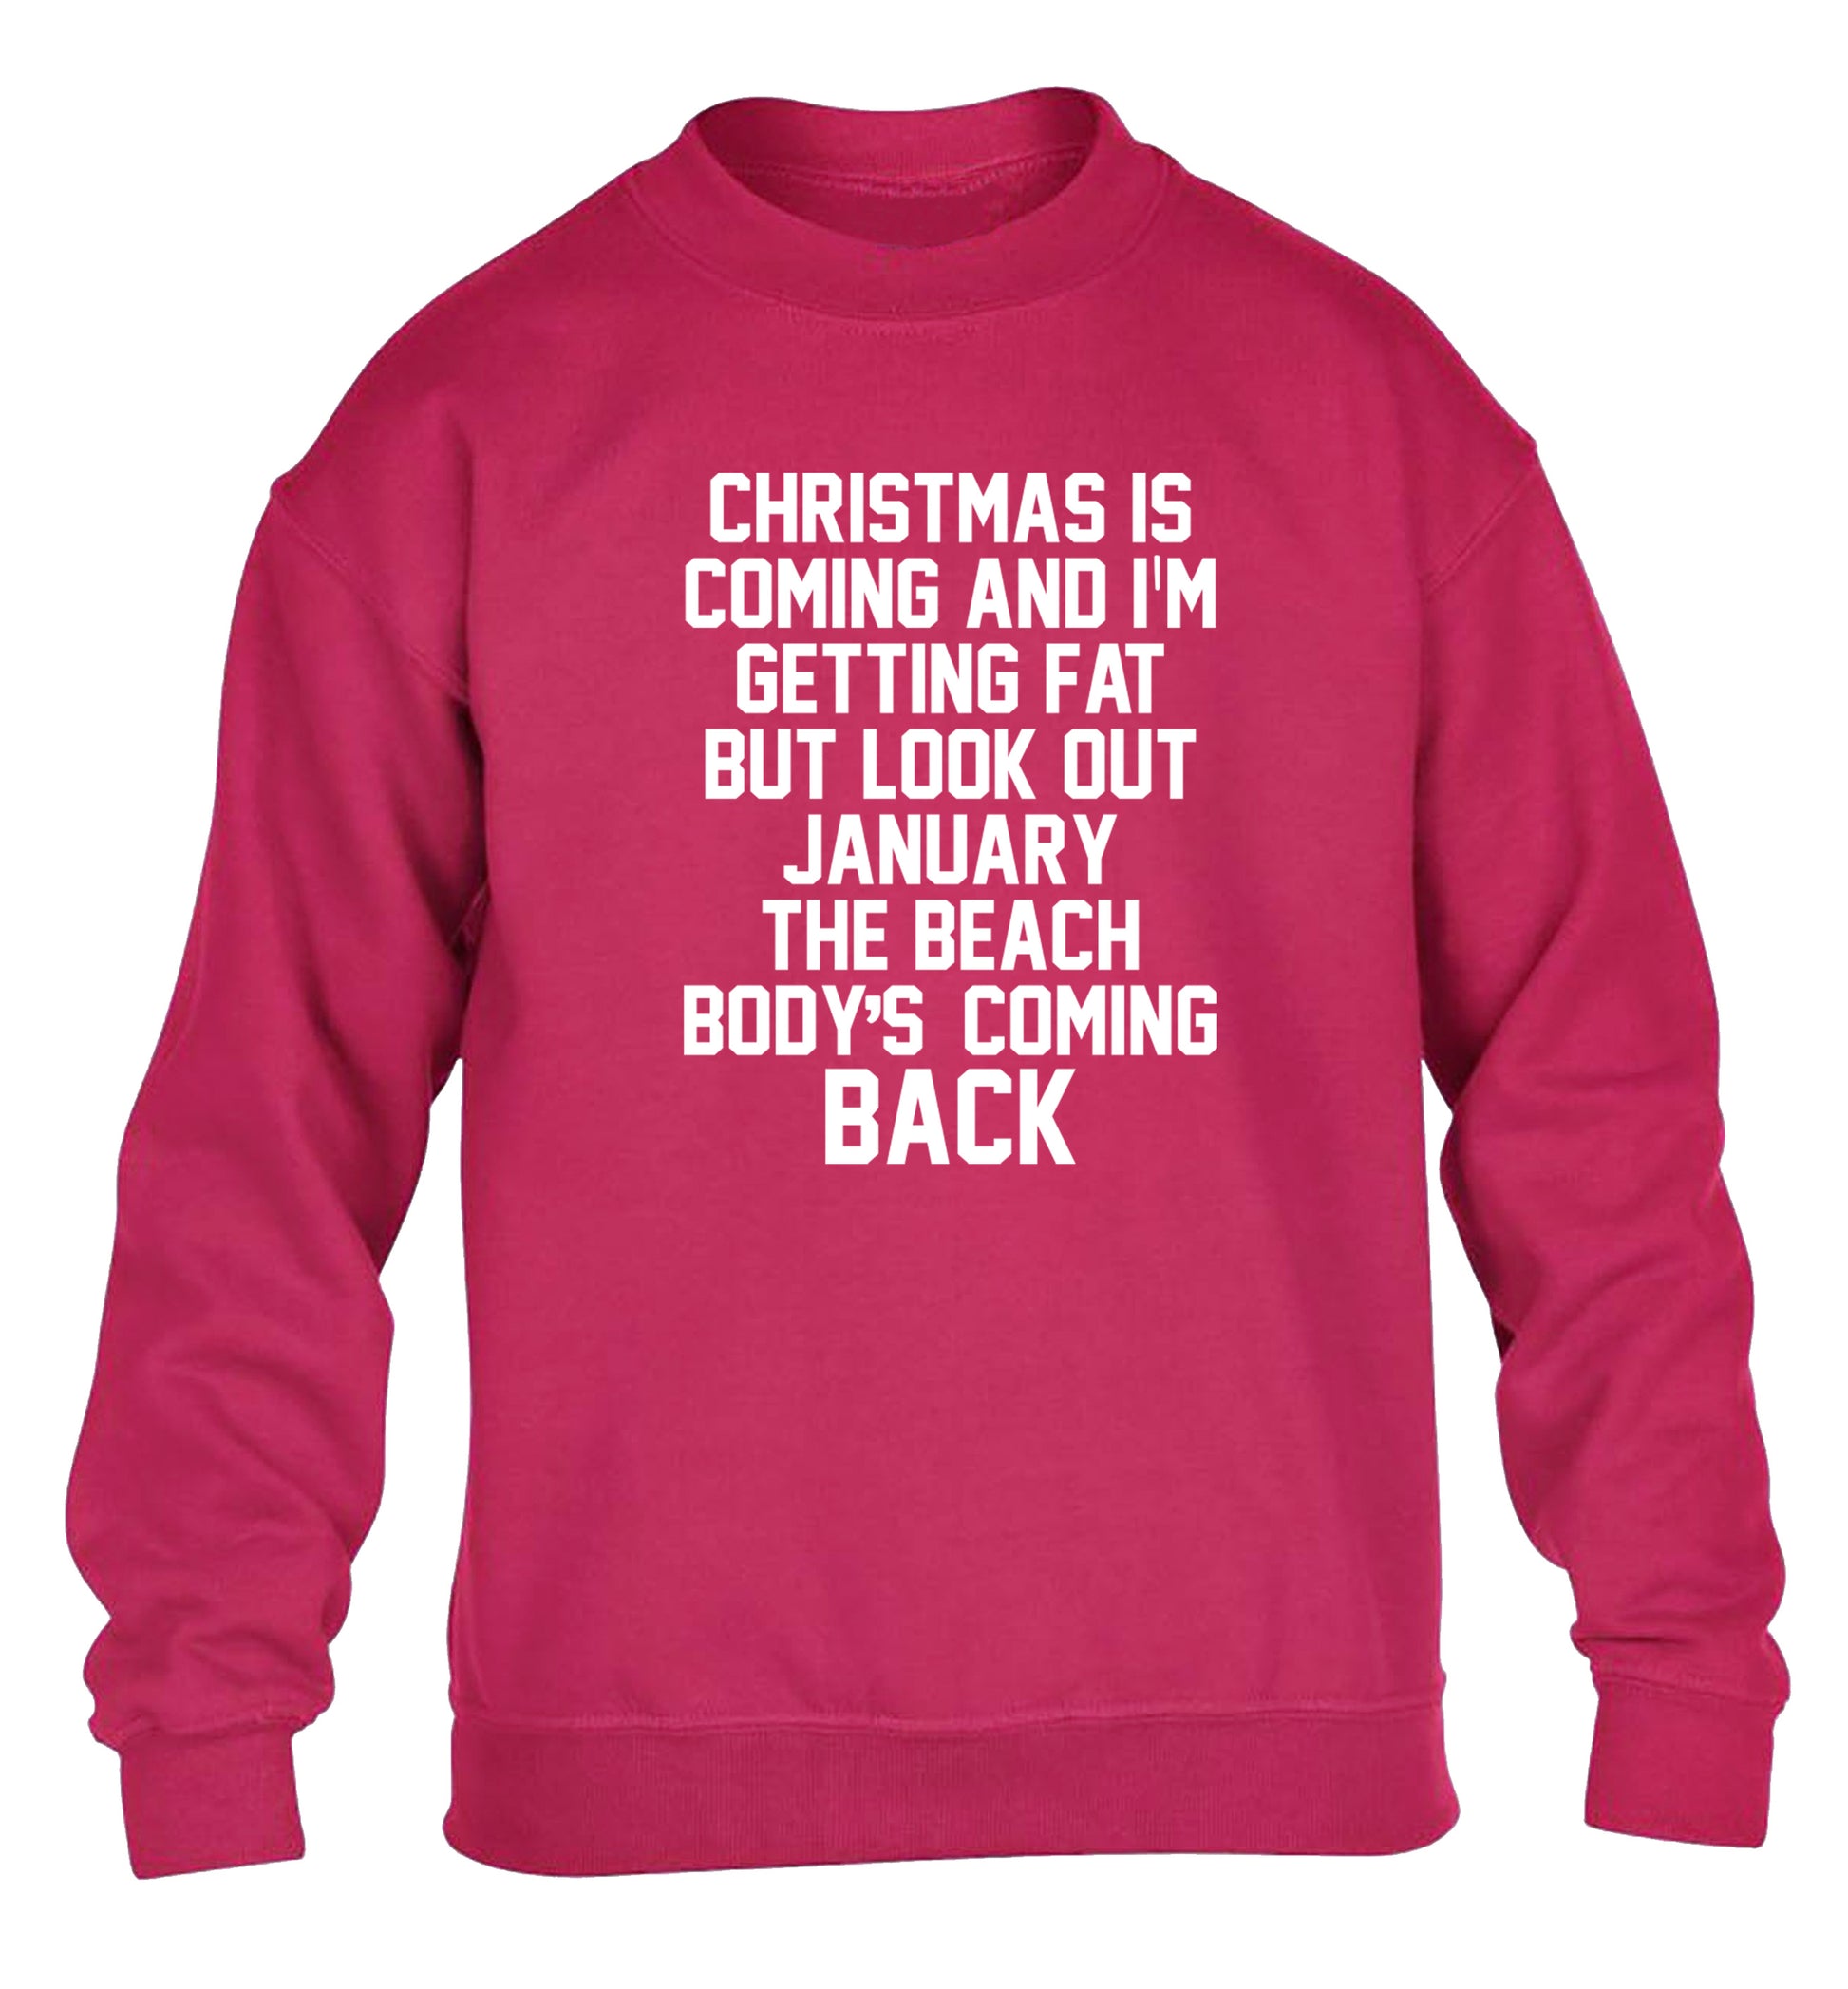 Christmas is coming and I'm getting fat but look out January the beach body's coming back! children's pink sweater 12-14 Years